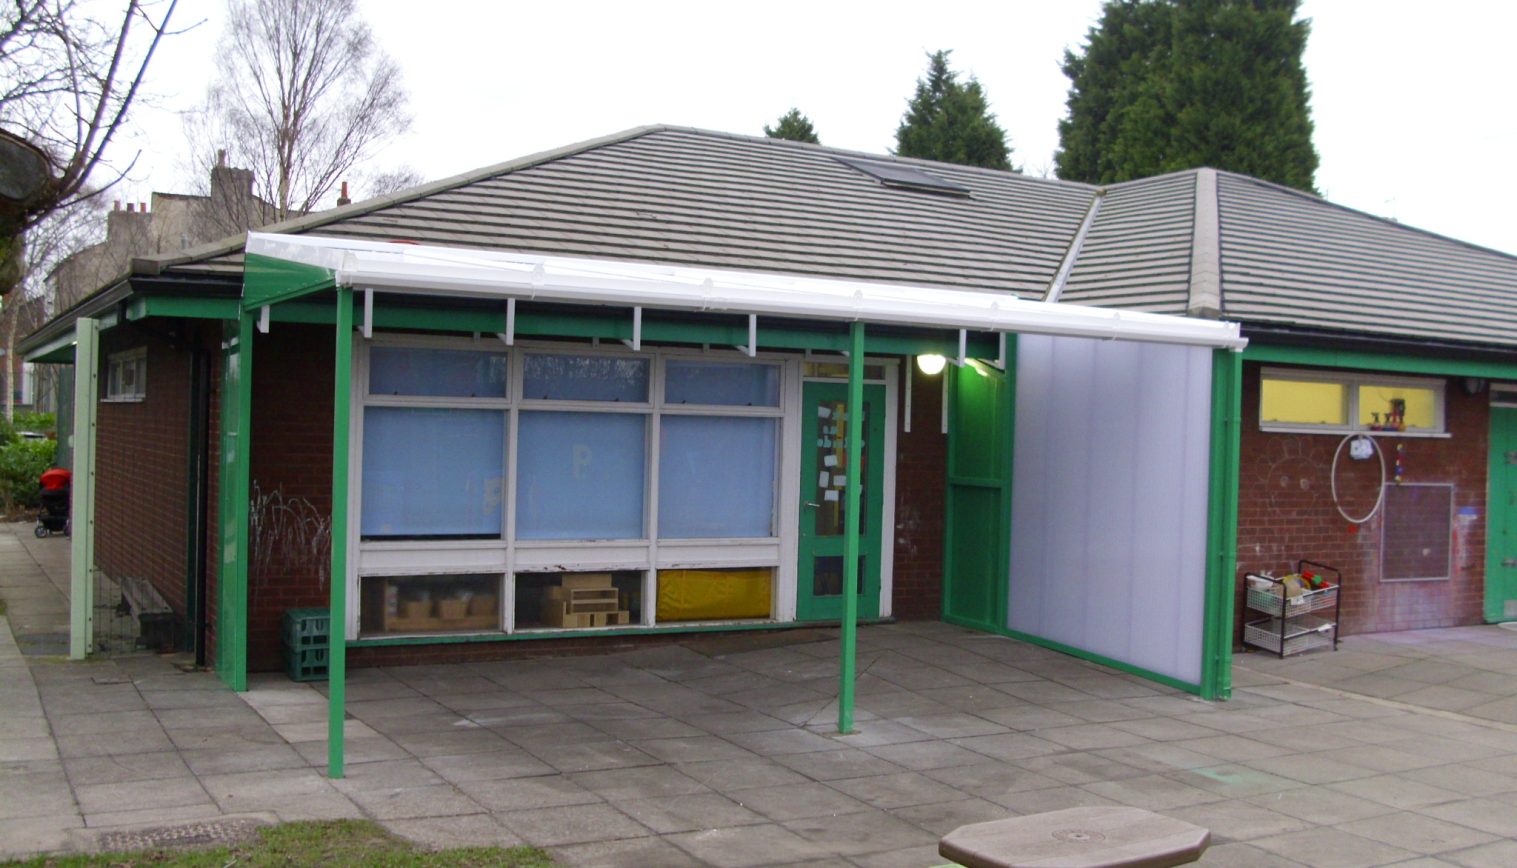 Slade Lane Children’s Centre – Wall Mounted Canopy